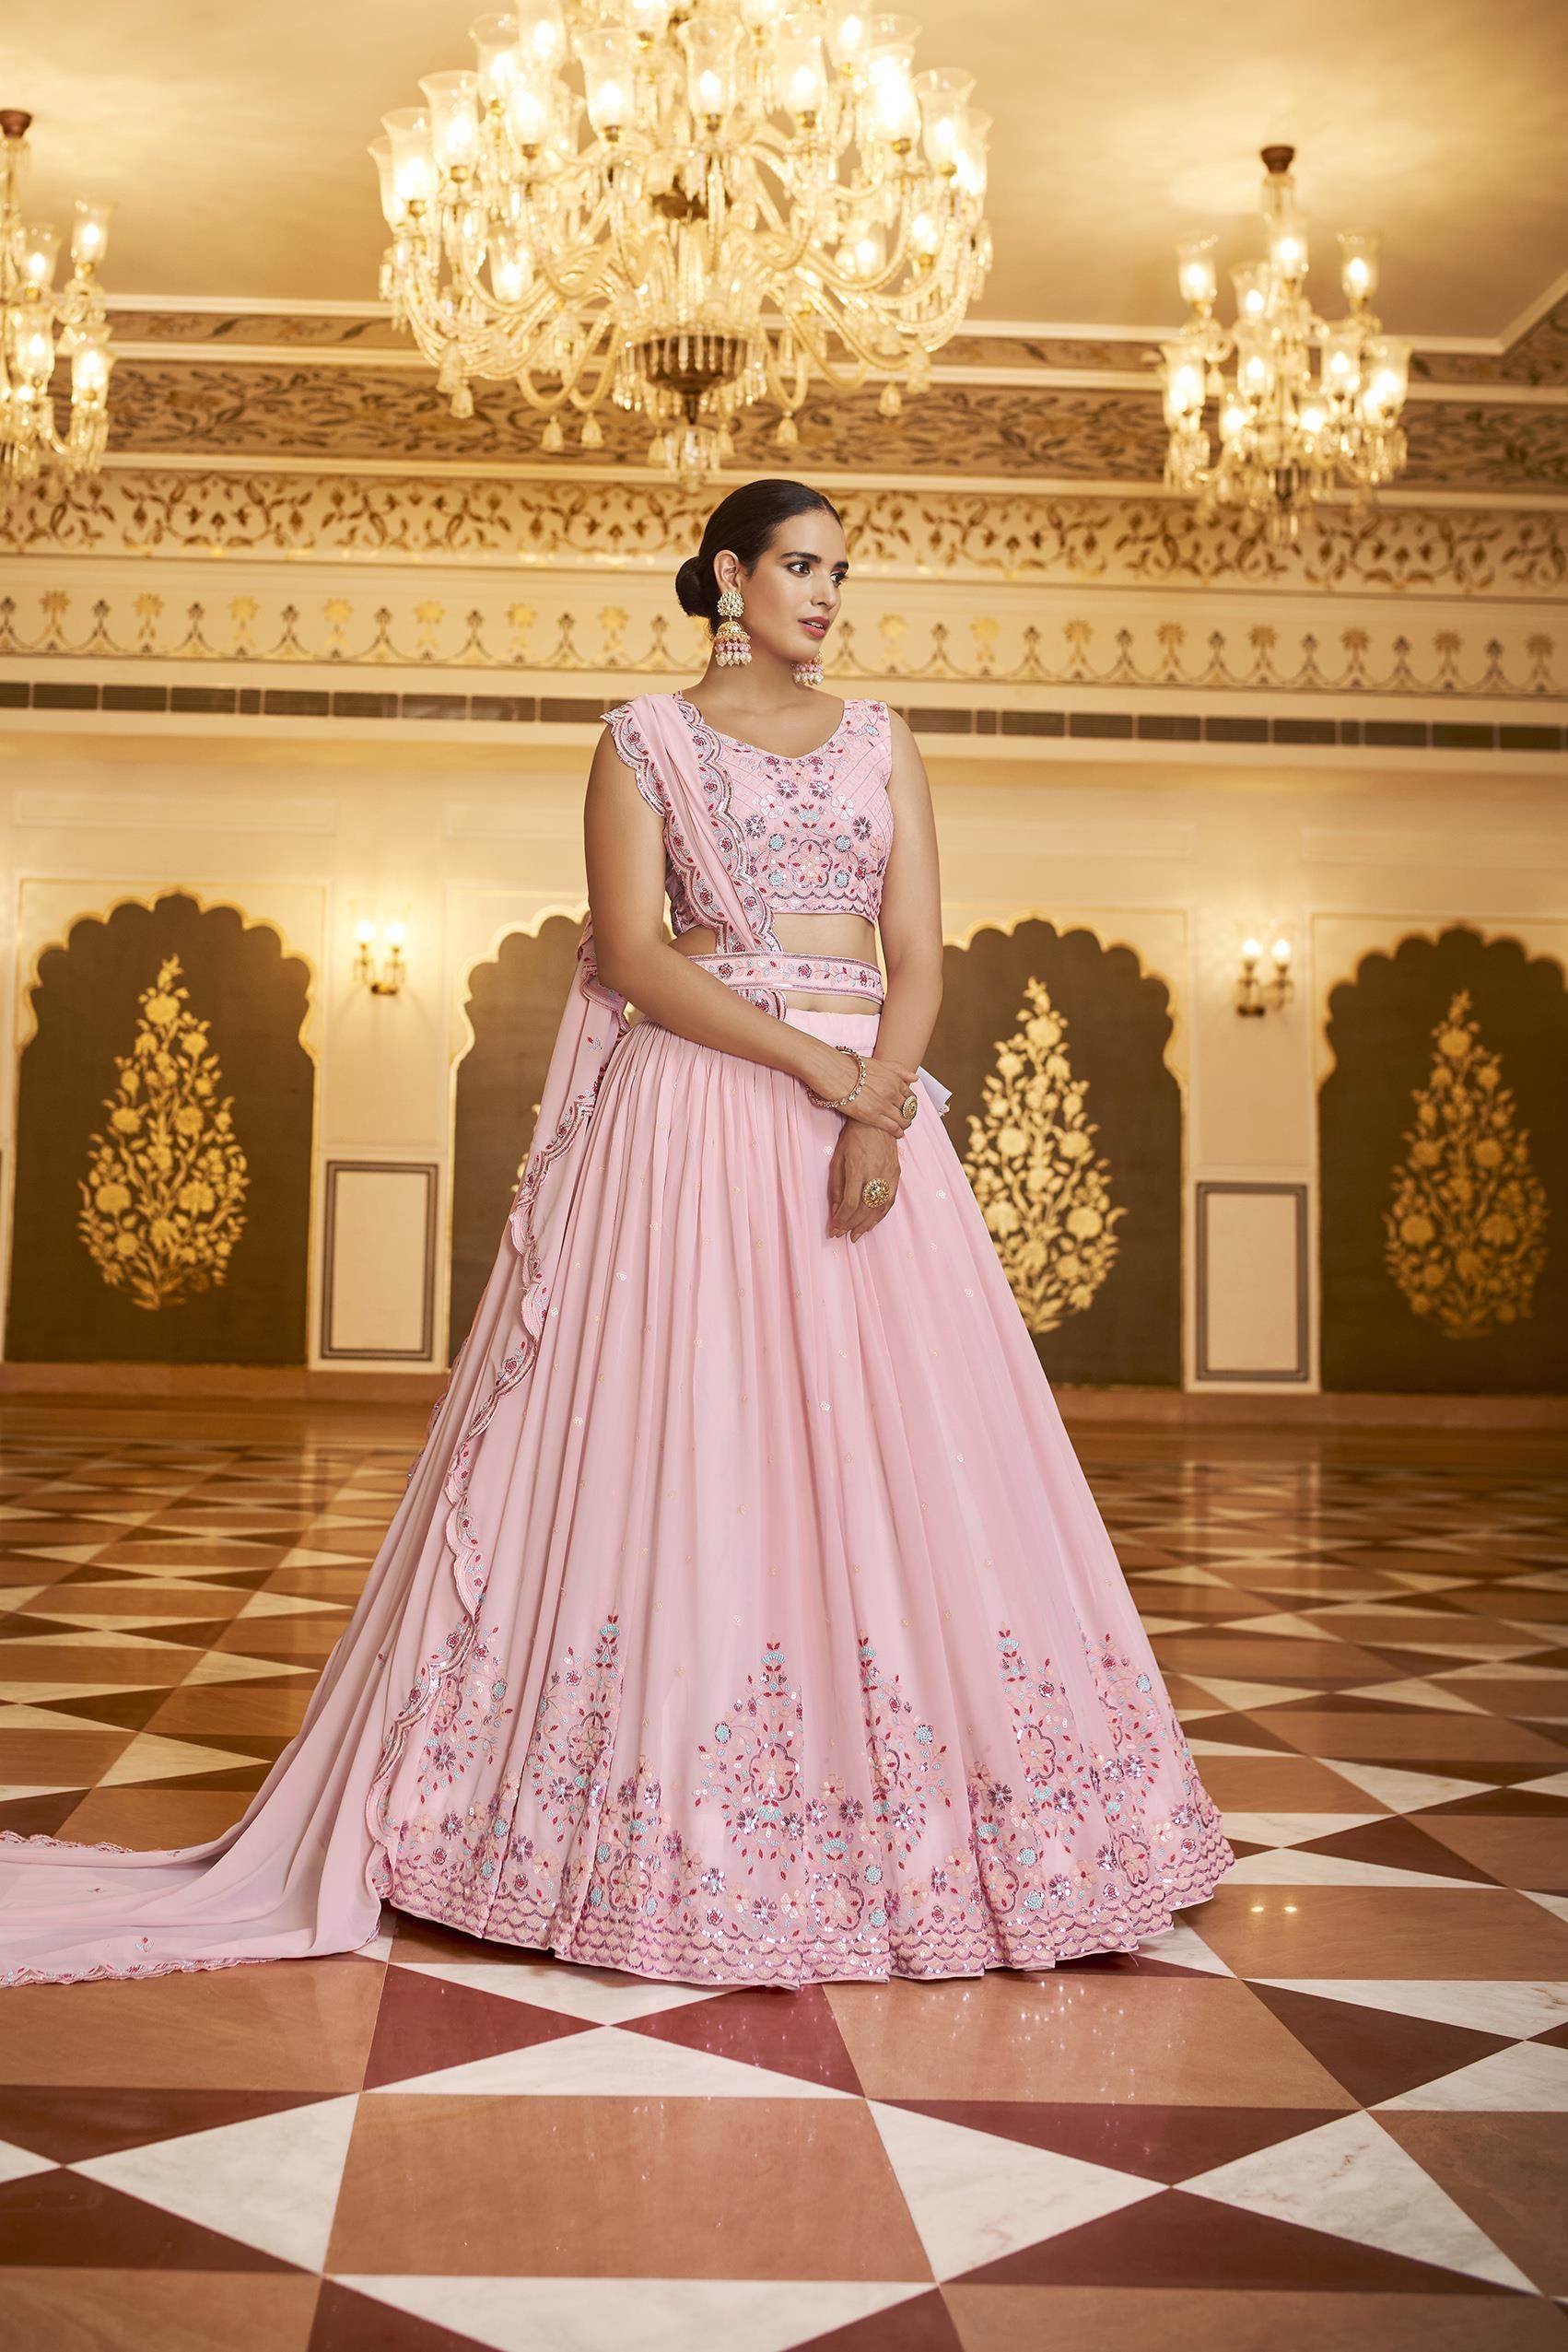 Premium Photo | Elegant Indian duo in clothing shoot with gray suit and  romantic blush pink gown